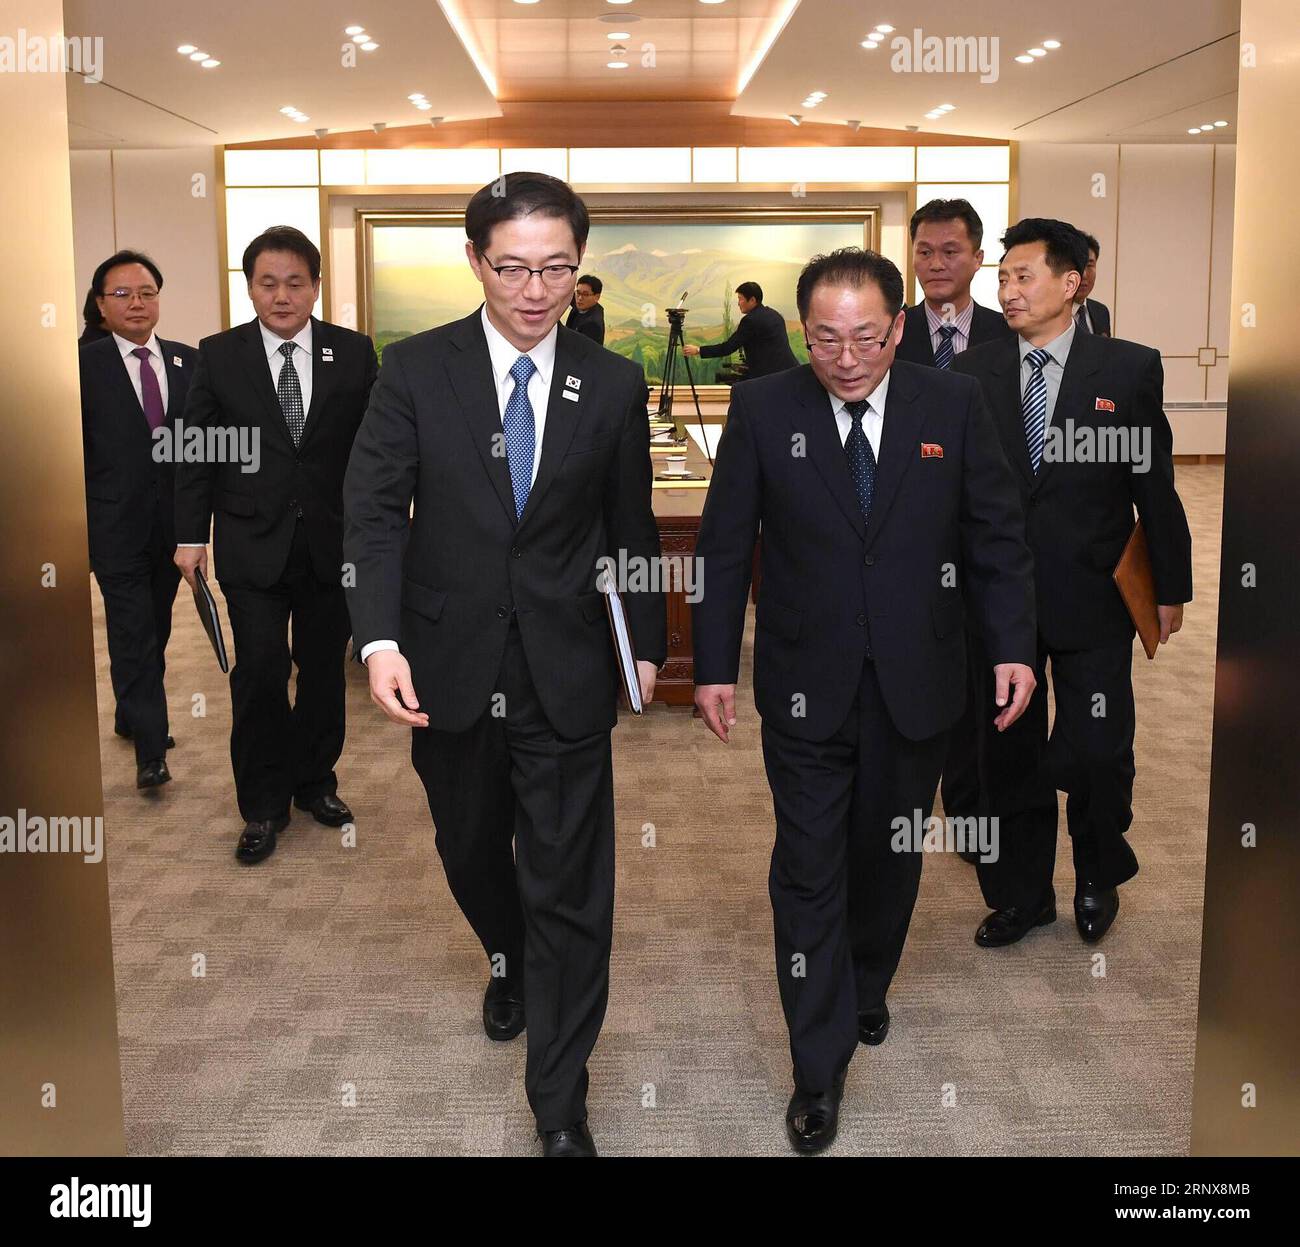 Olympia, Nord- und Südkorea laufen bei Eröffnungsfeier gemeinsam ein (180117) -- SEOUL, Jan. 17, 2018 -- Chun Hae-sung (L, front), vice unification minister of South Korea, and Jon Jong Su (R, front), vice chairman of the Committee for the Peaceful Reunification of the Fatherland of the Democratic People s Republic of Korea (DPRK), leave after holding dialogue at Peace House, a building in the South Korean side of Panmunjom, Jan. 17, 2018. South Korea and the DPRK have agreed to jointly march at the opening ceremony of the South Korea-hosted Winter Olympics and to cheer together for both athle Stock Photo